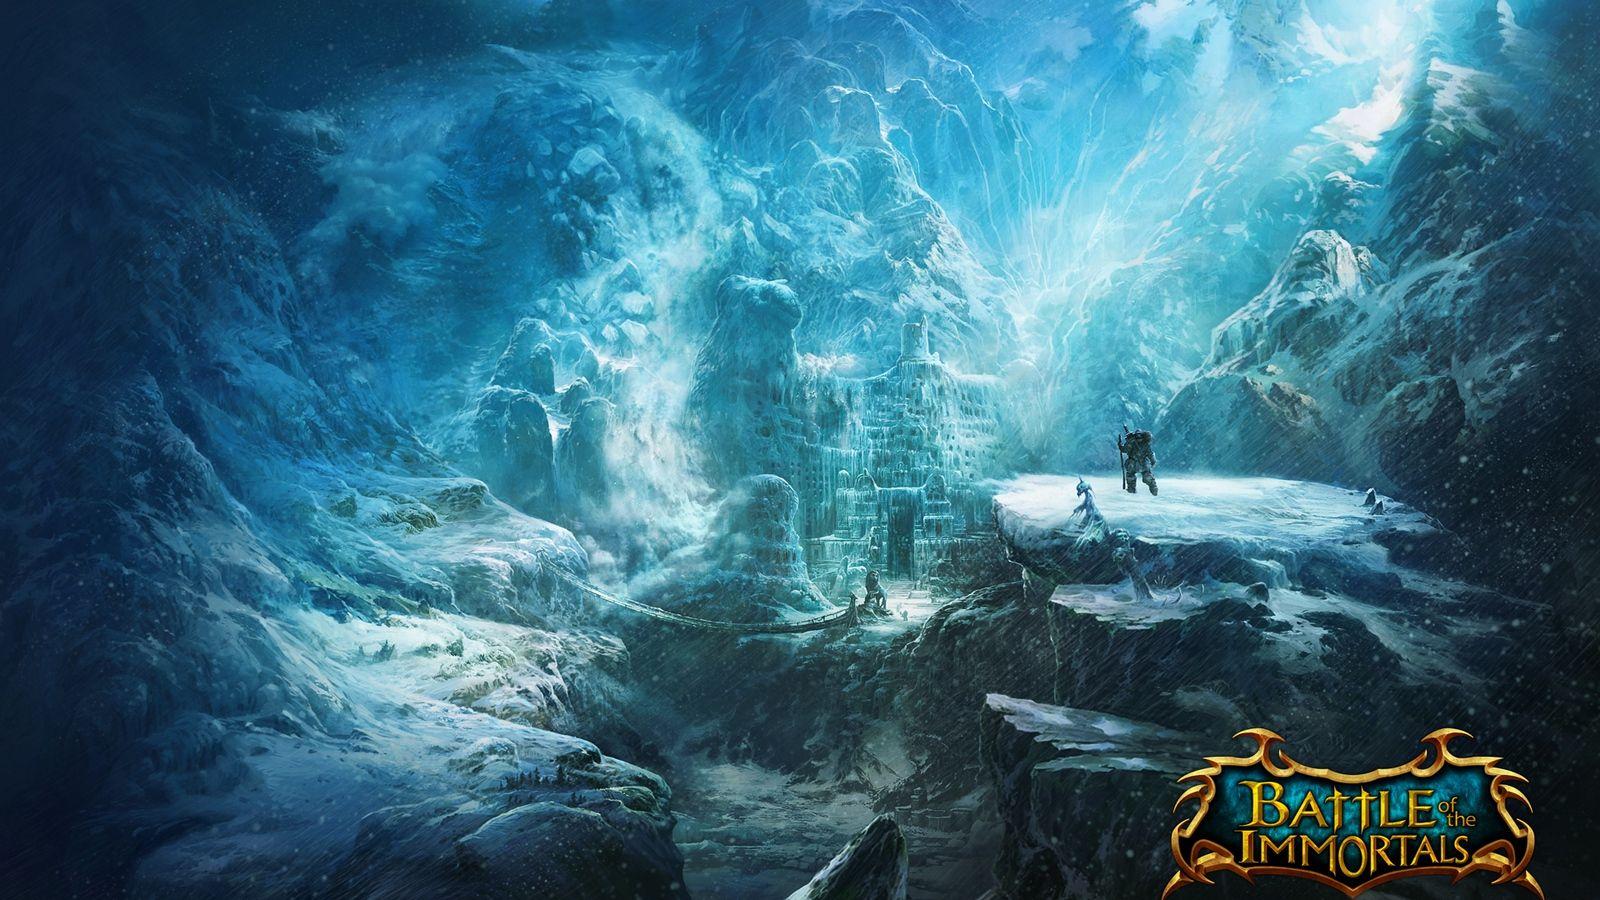 Download wallpaper 1600x900 battle of the immortals, valley, snow